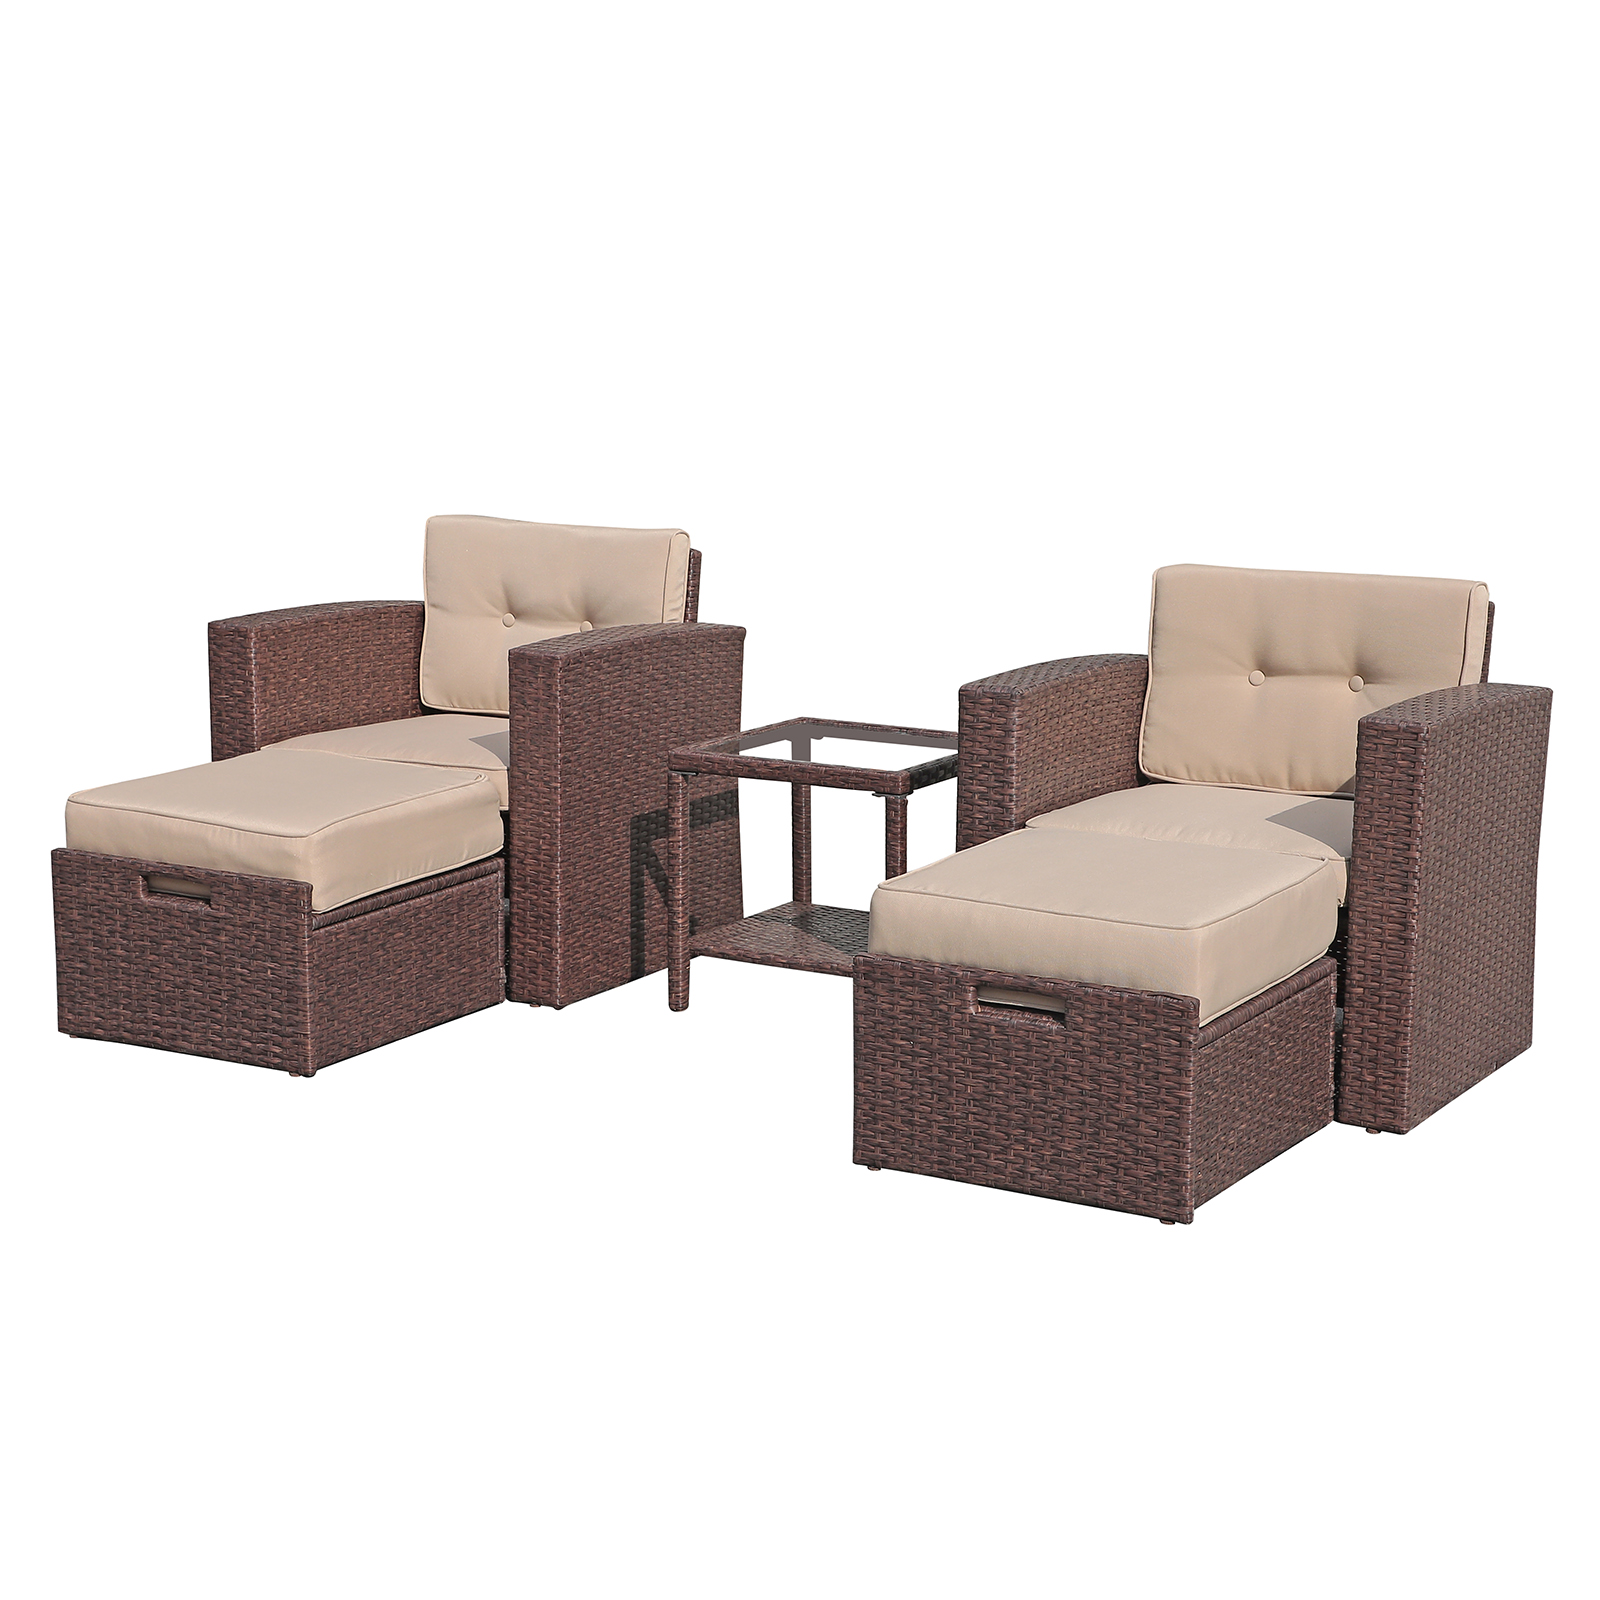 JOIVI 5 Pieces Patio Furniture Set, Outdoor Brown PE Rattan Wicker Patio Conversation Set, Lounge Chairs with Cushioned Ottoman and Tempered Glass Side Table - image 5 of 9